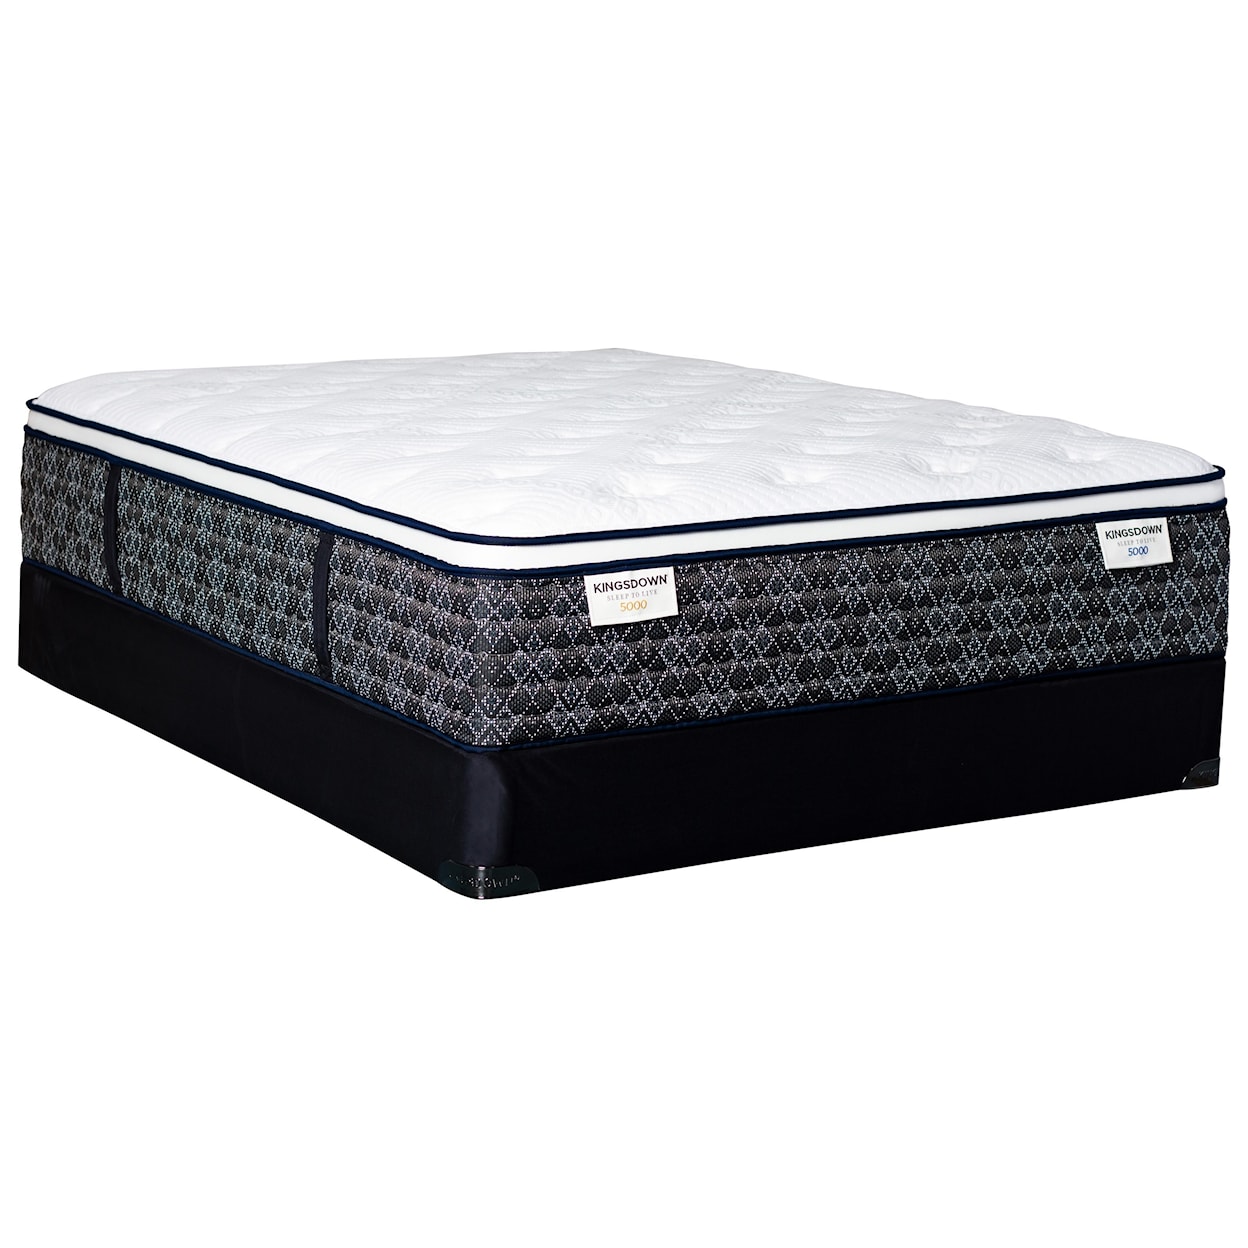 Kingsdown Sleep to Live 5000 Green Red ET King Pocketed Coil Mattress LoPro Set